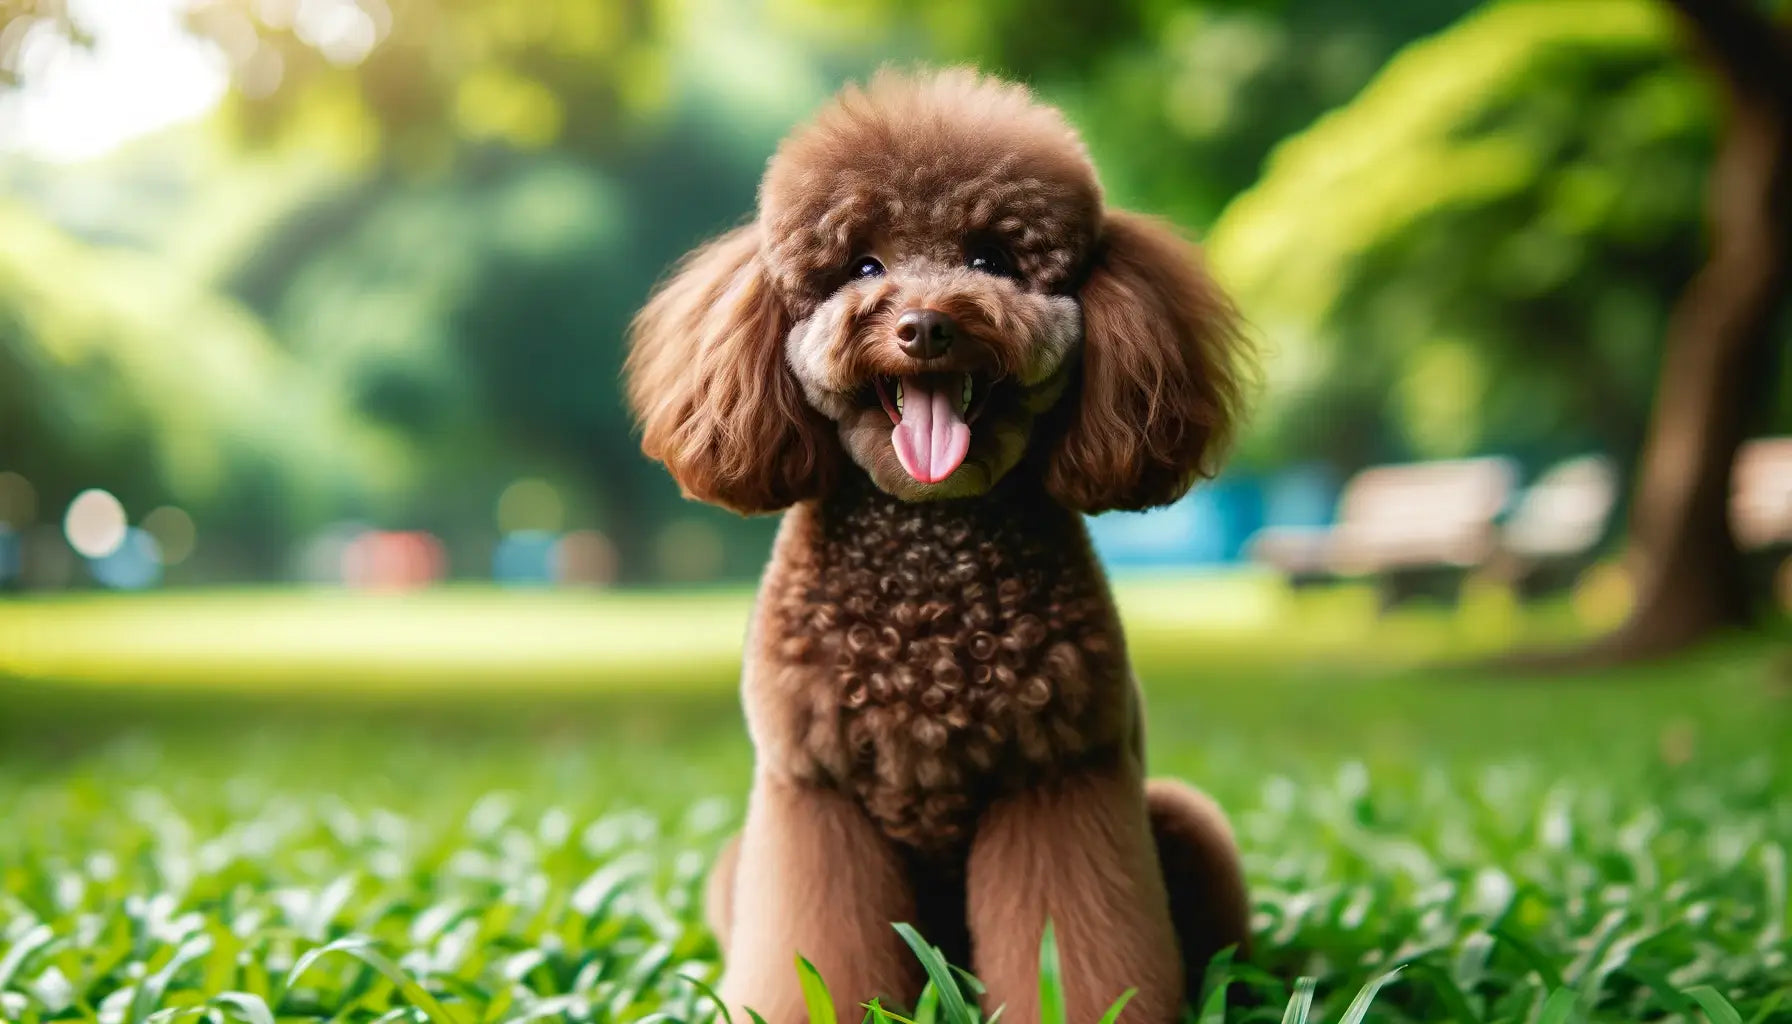 A brown Poodle sitting on grass with a happy expression, tongue out, in a park-like setting.